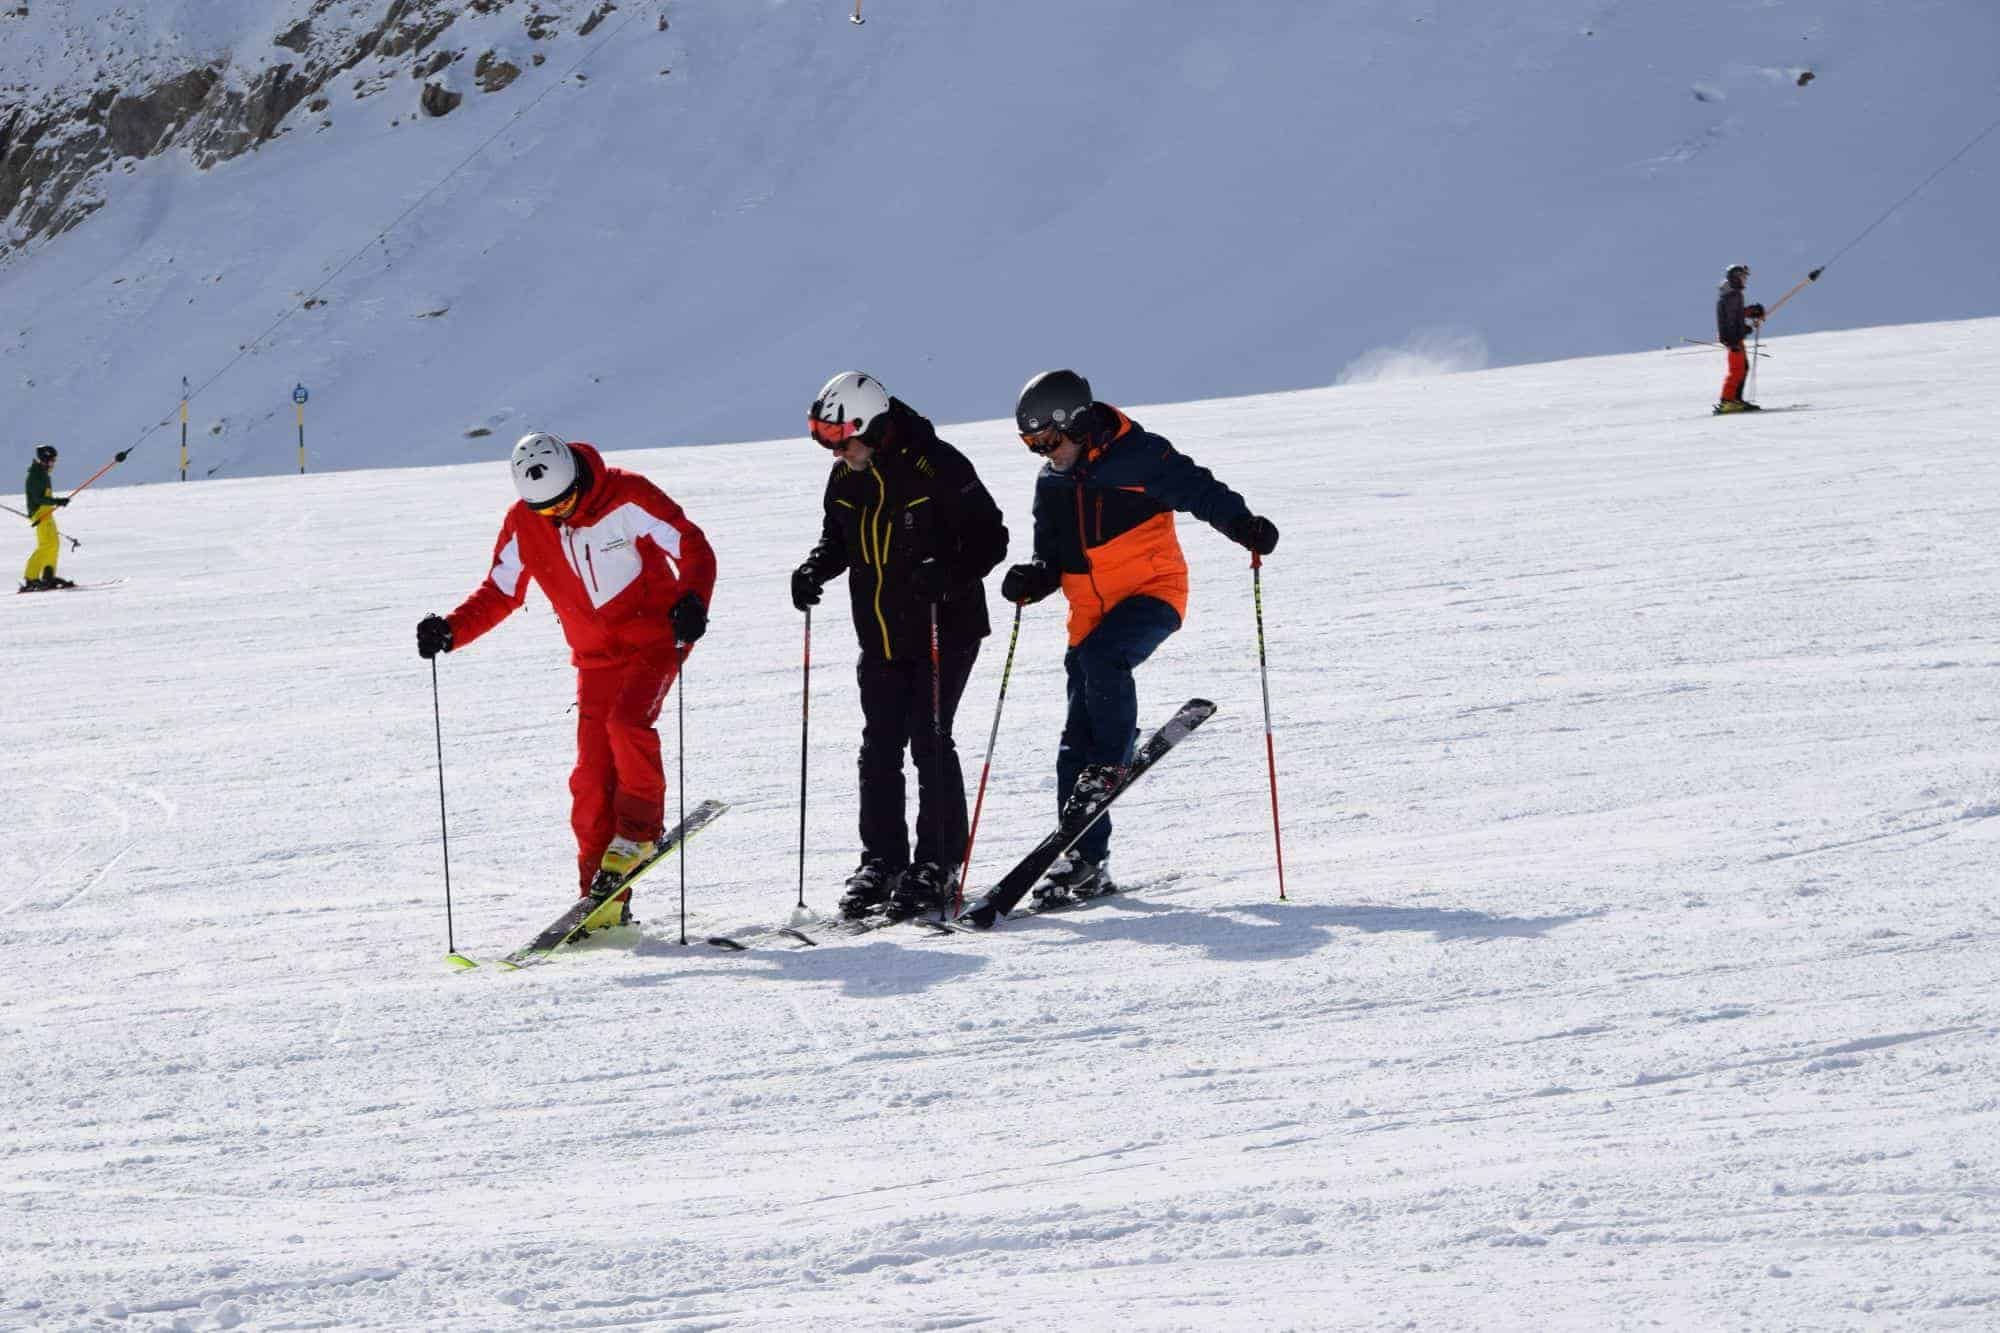 How to deal with ski fear?